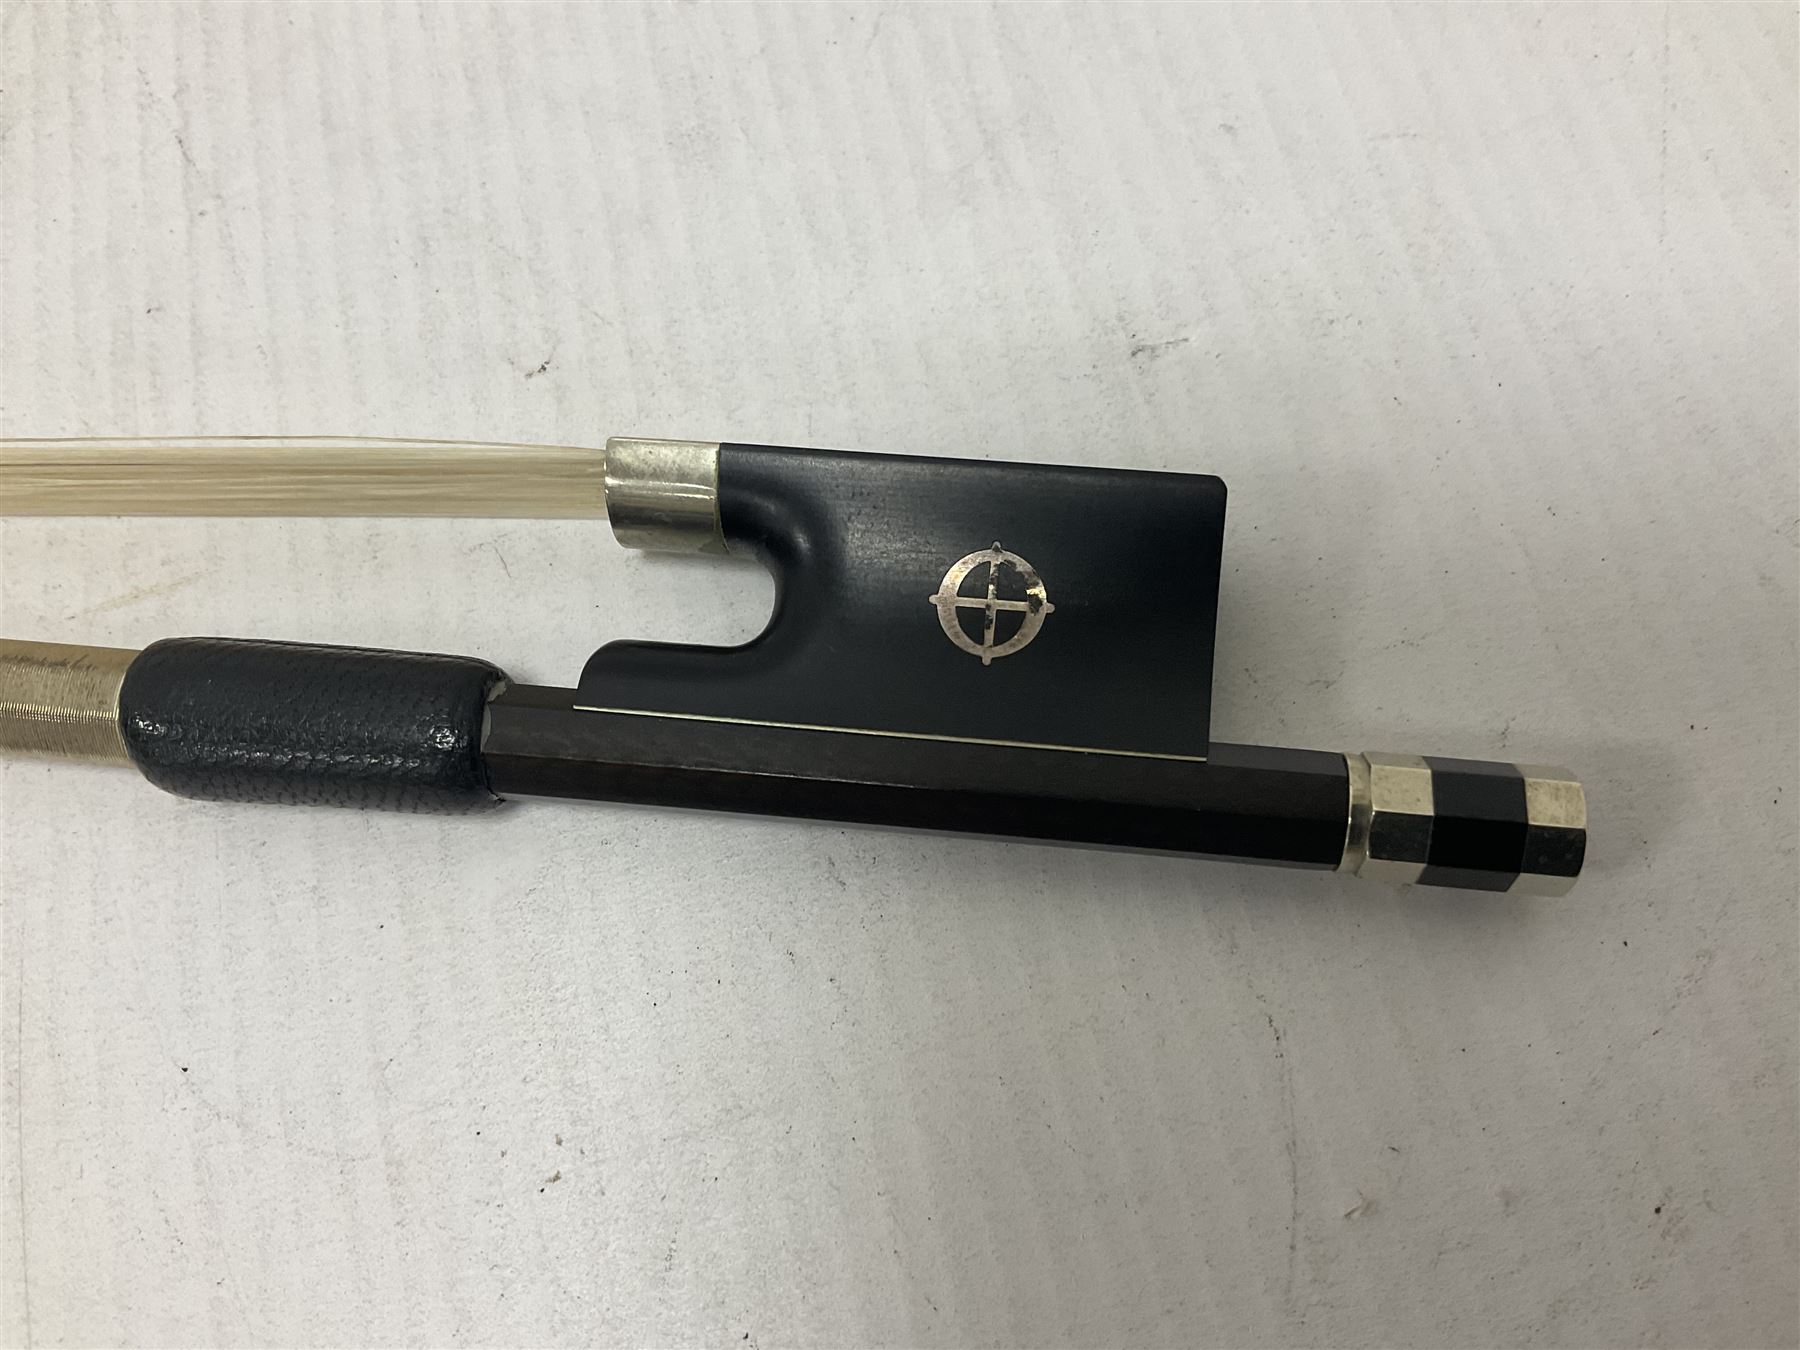 CodaBow Diamond carbon fibre violin bow with Nickel plated fittings - Image 5 of 13